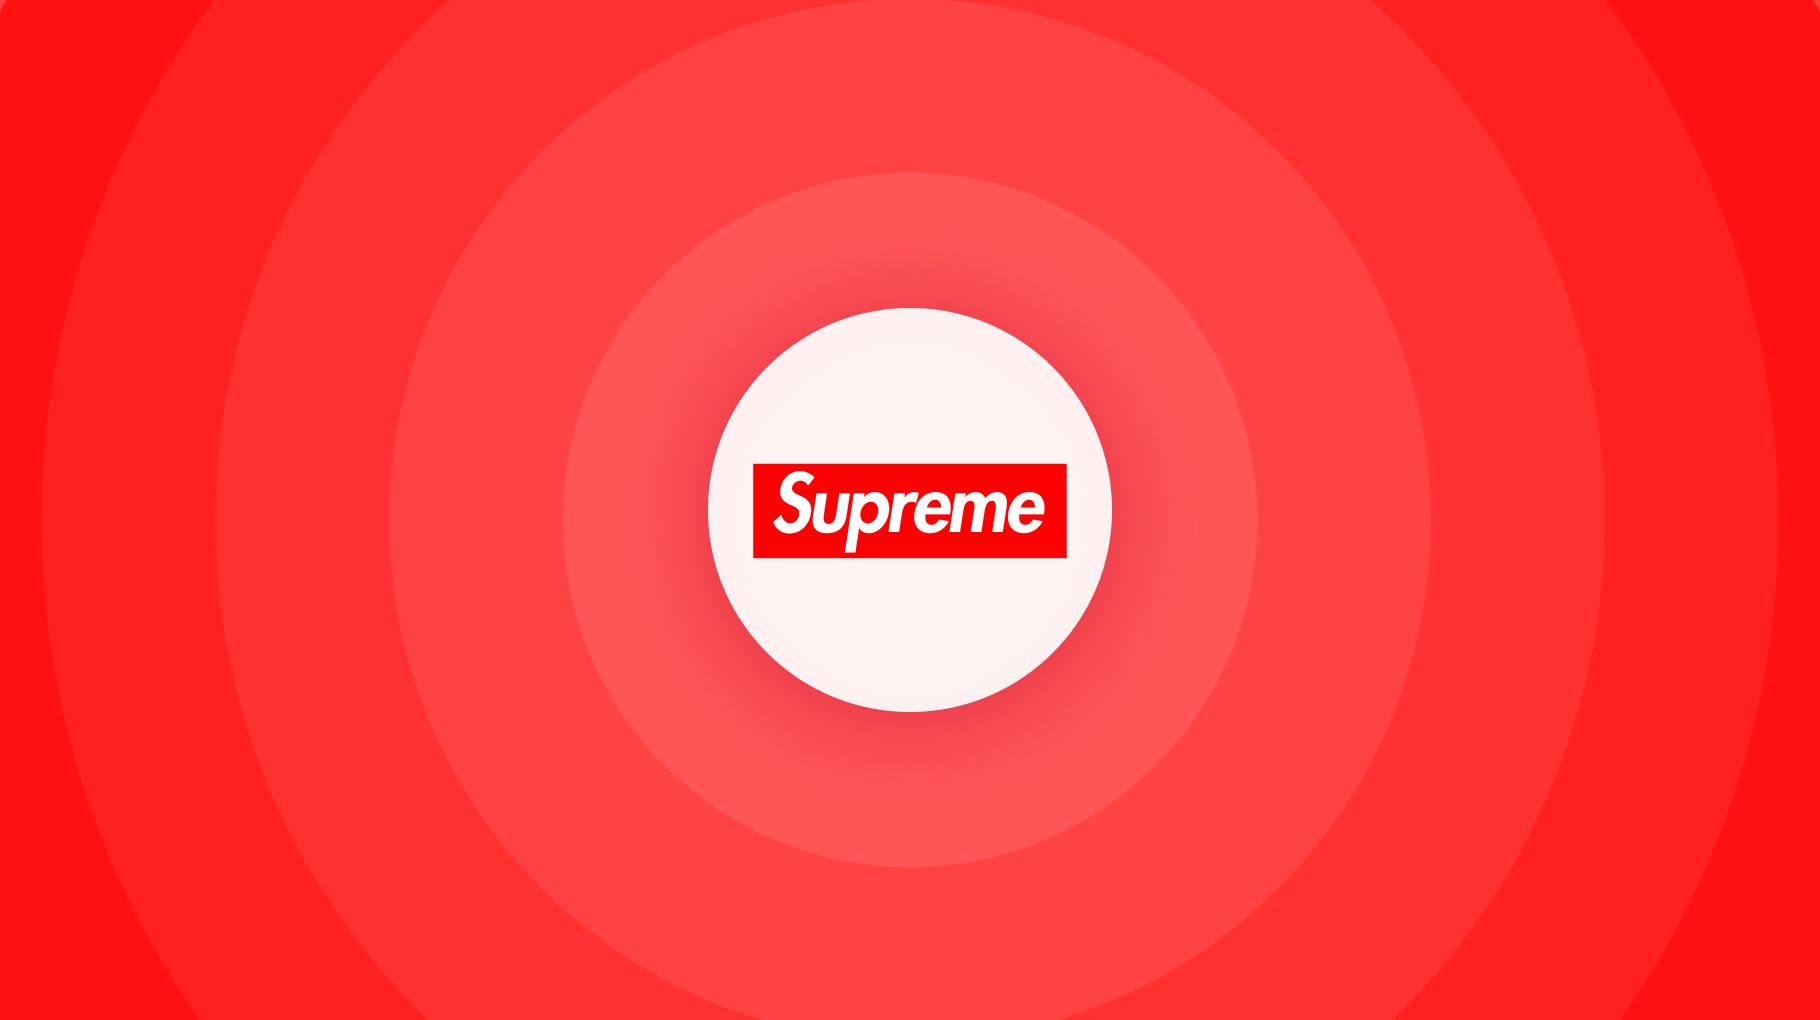 Supreme Revenue and Growth